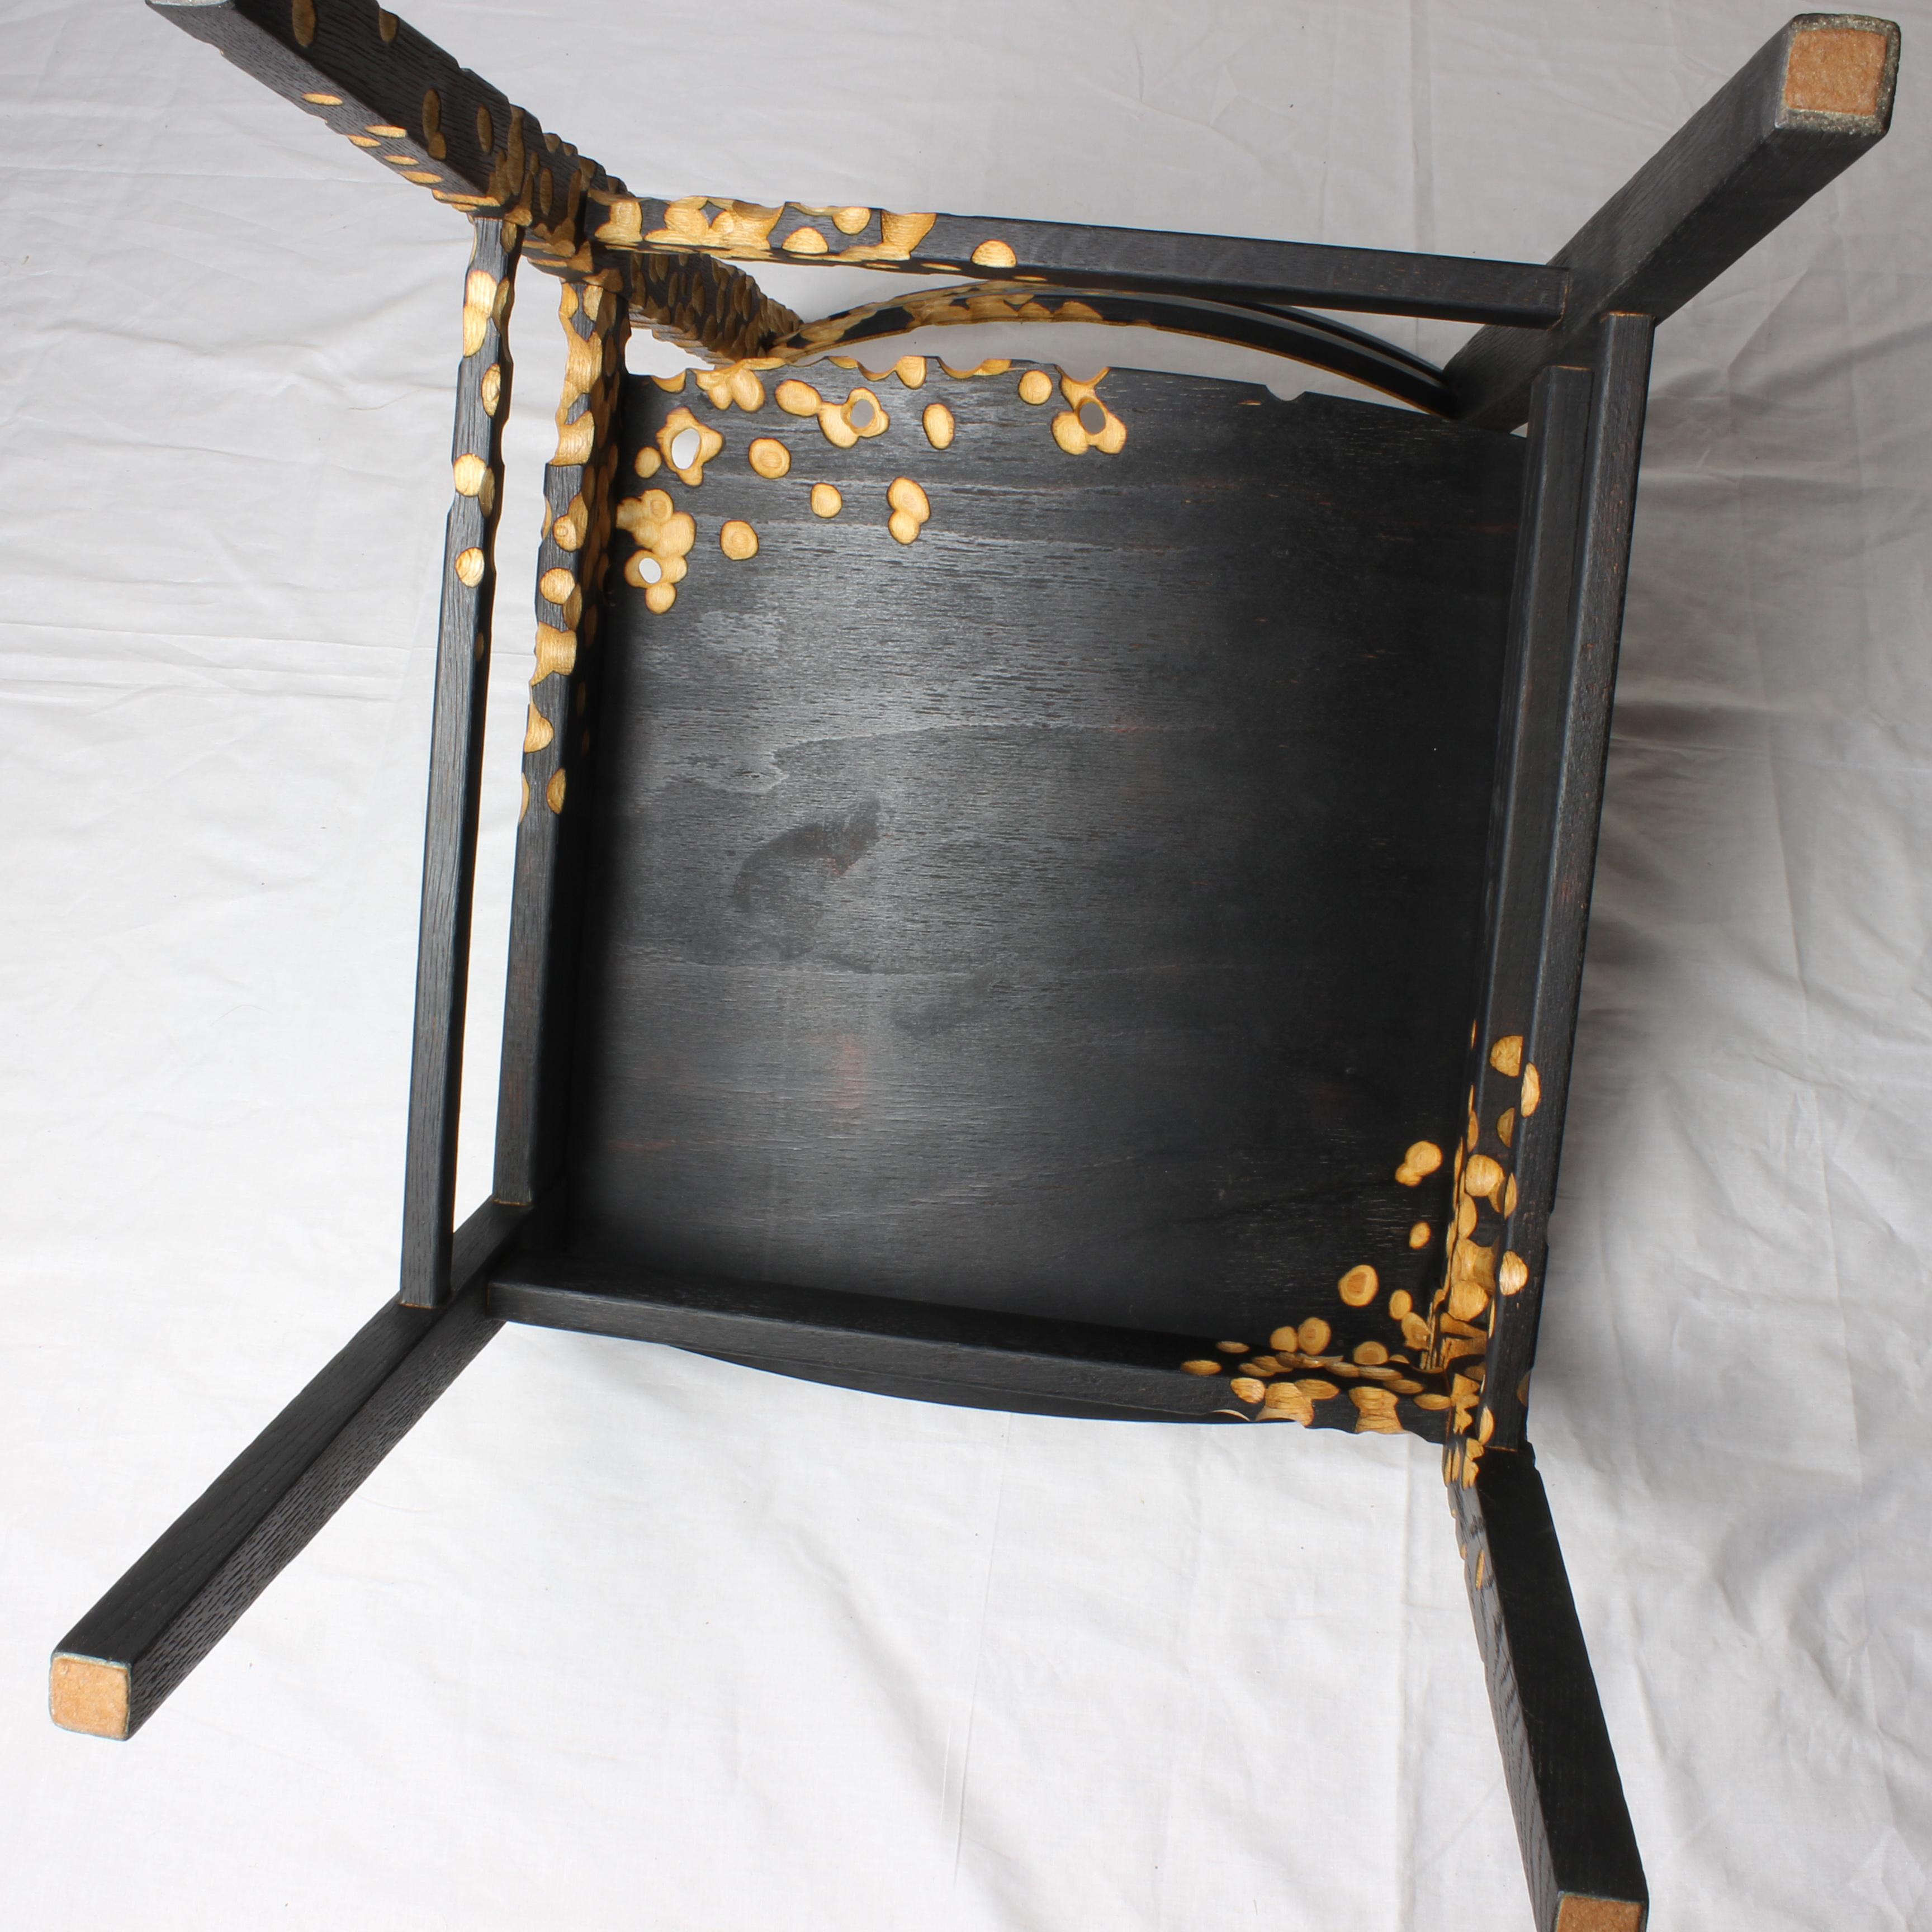 N1 Chair, Unique Sculptured, Charred Furniture, from Salvaged Chair and Cork For Sale 5